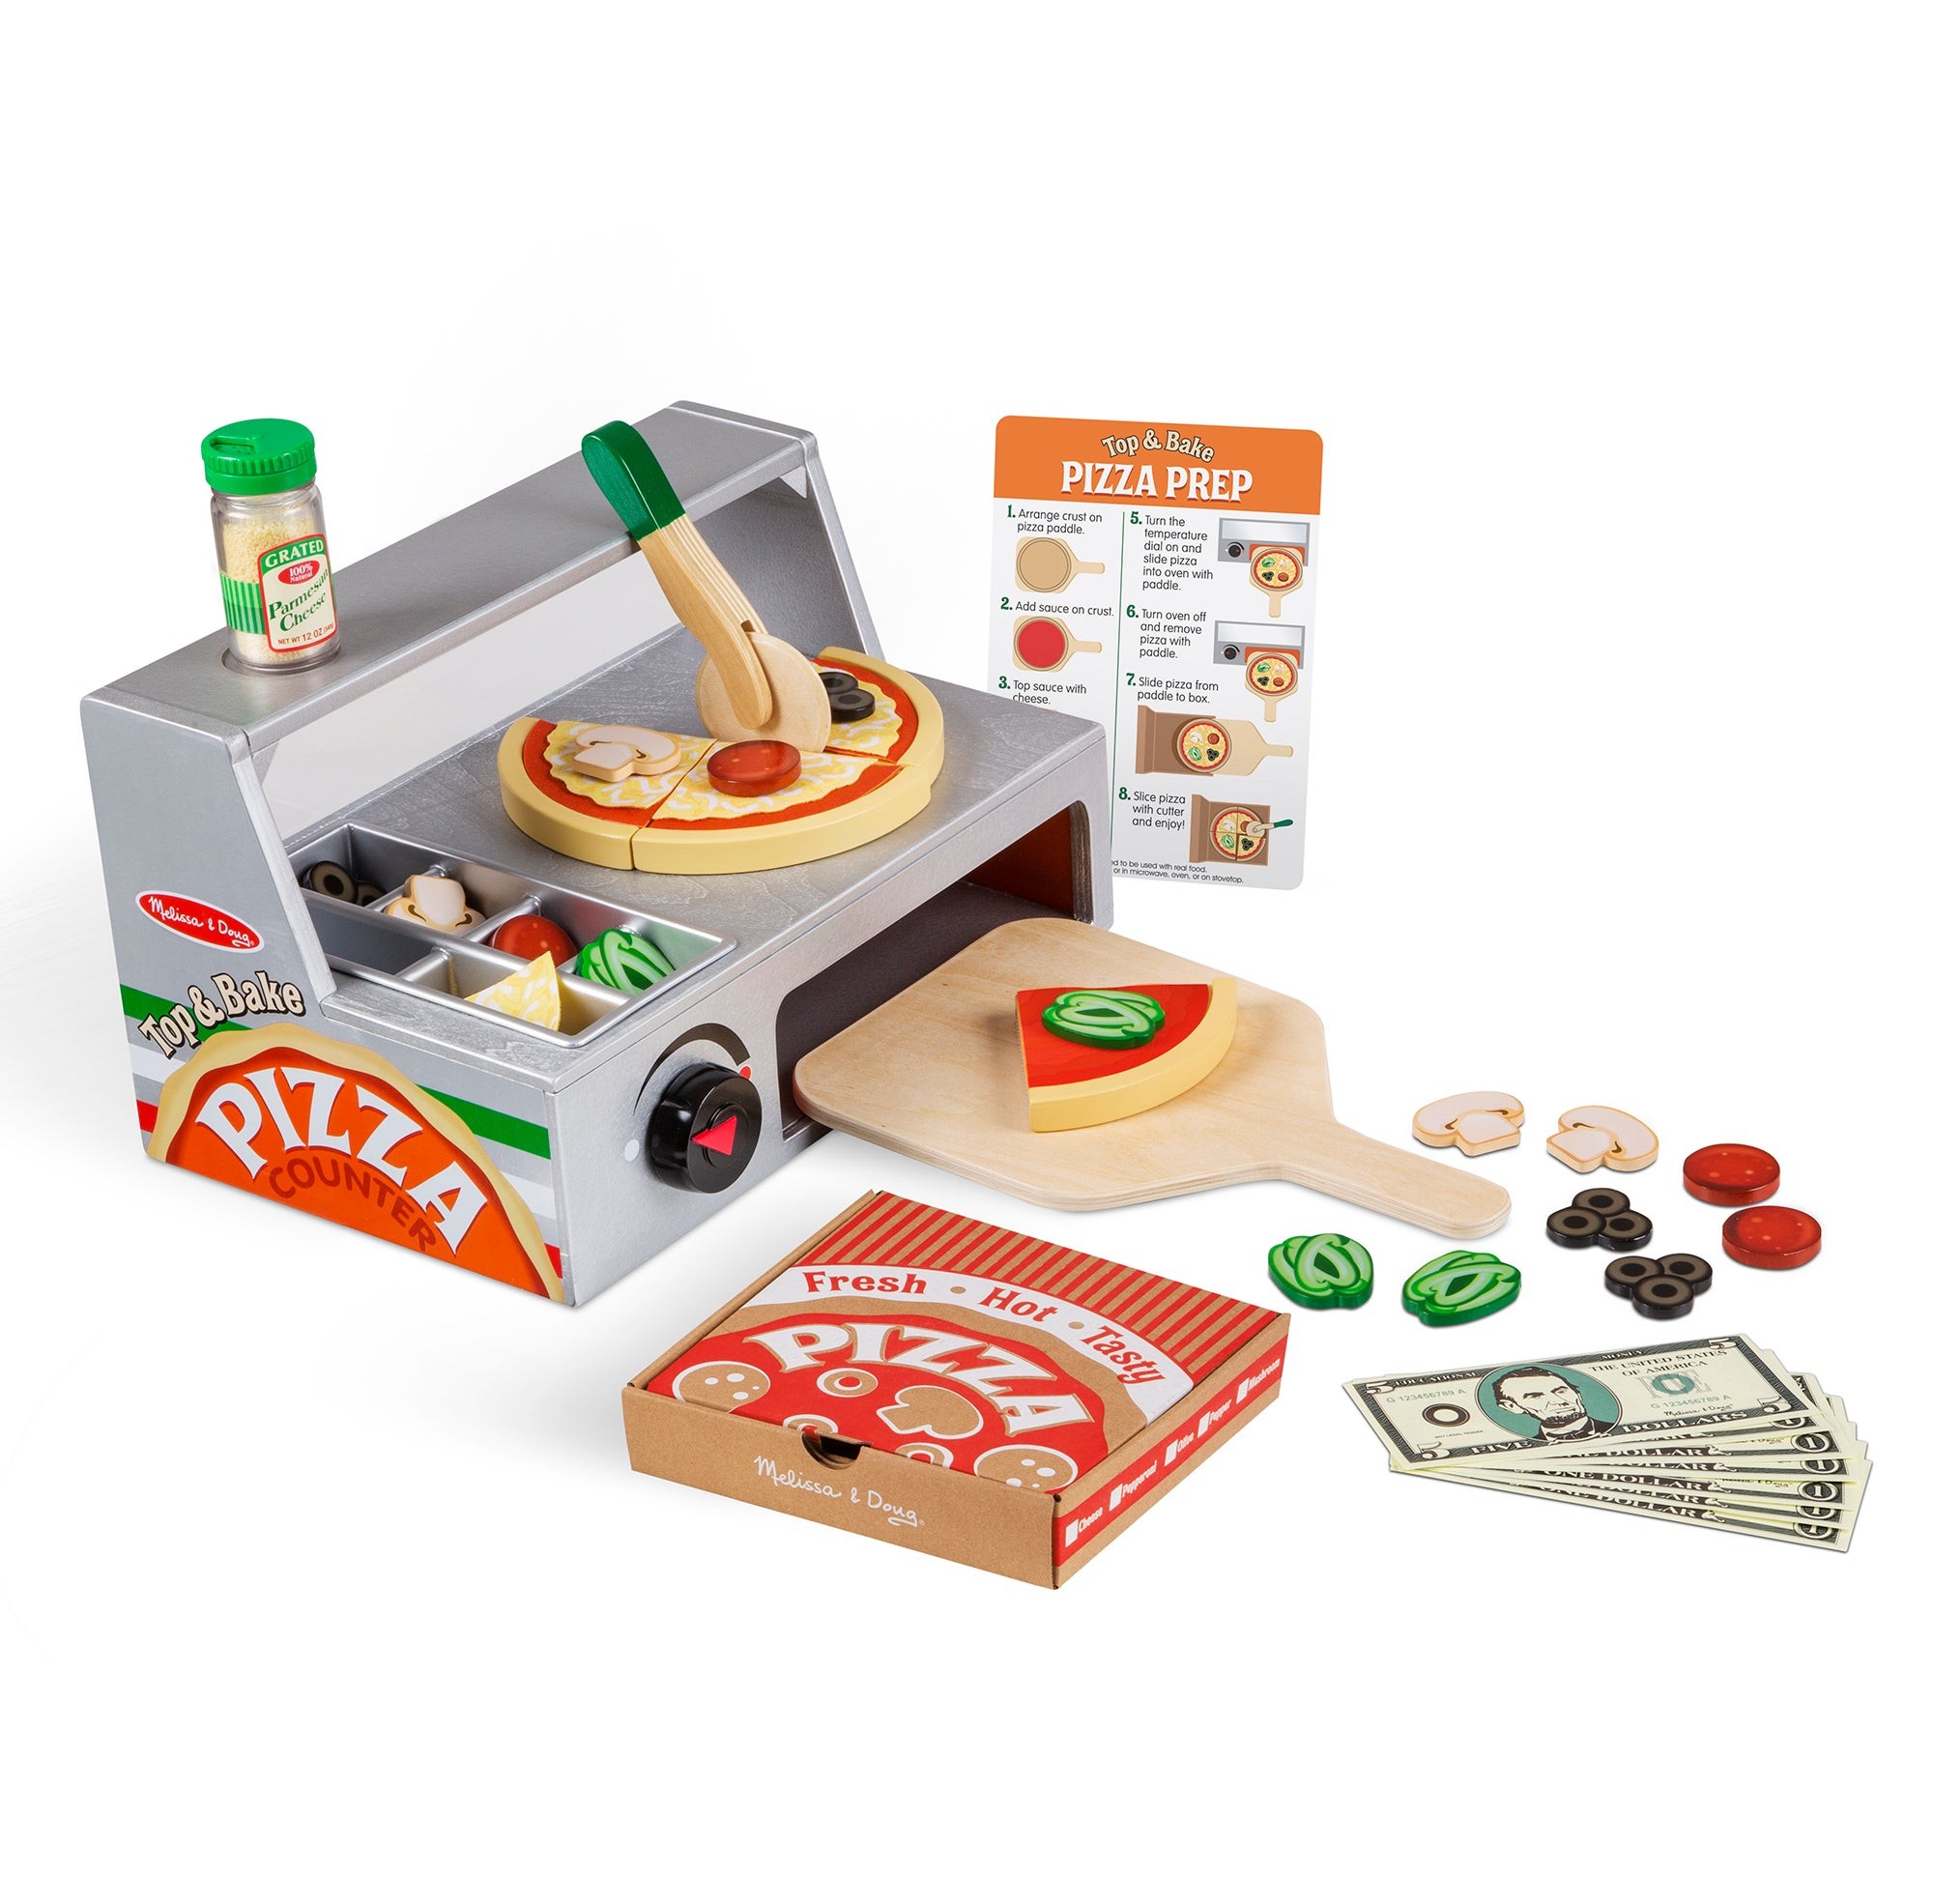 Top & Bake Pizza Counter Ages 3+ Years